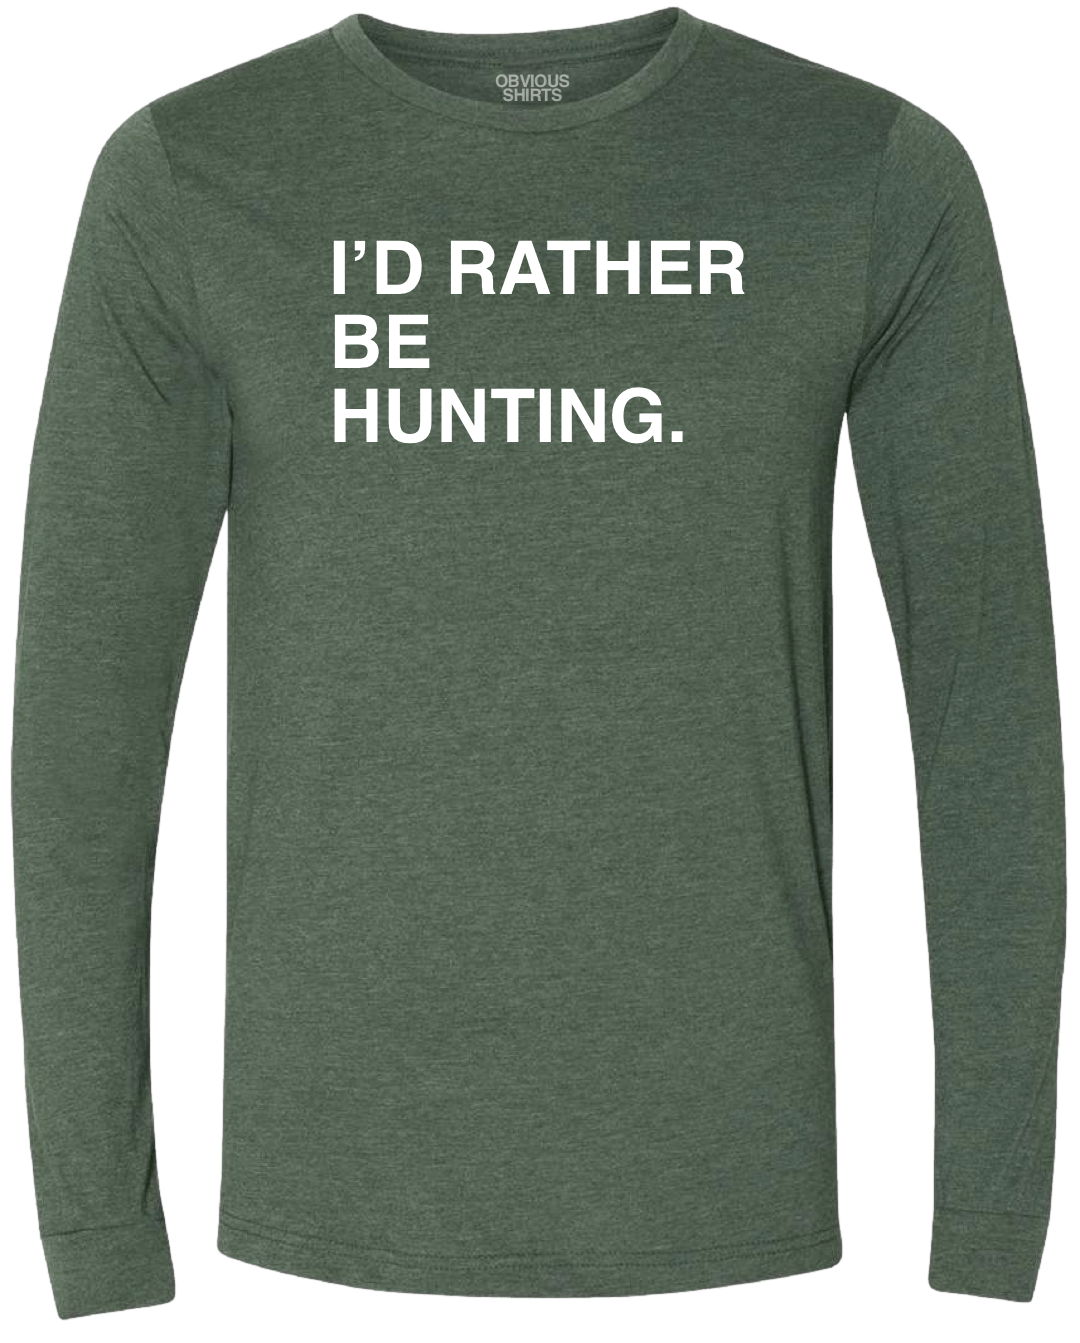 I'D RATHER BE HUNTING. (LONG SLEEVE) - OBVIOUS SHIRTS